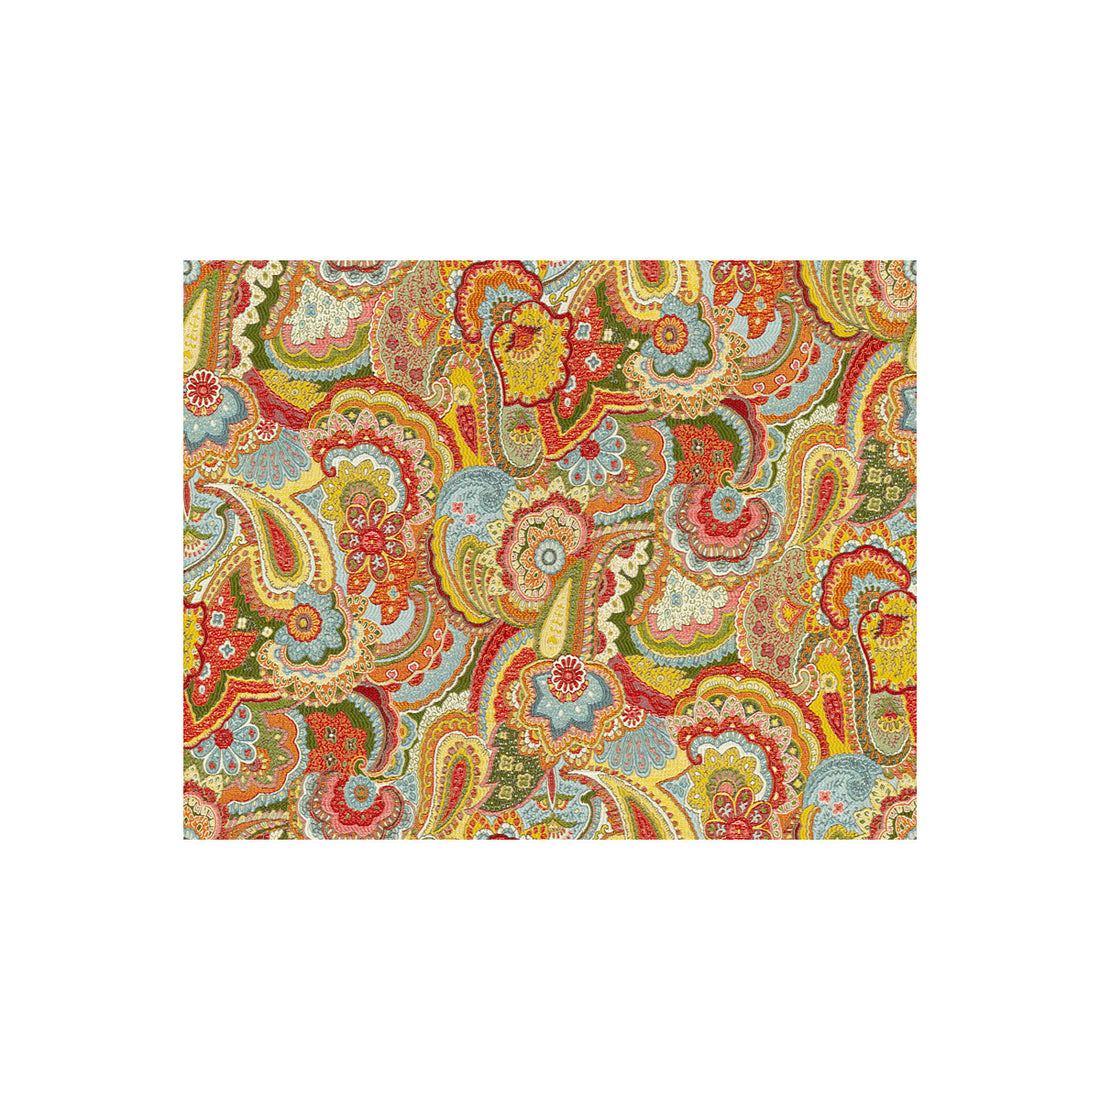 Paisley Crush fabric in primary color - pattern 32812.530.0 - by Kravet Couture in the Modern Colors III collection